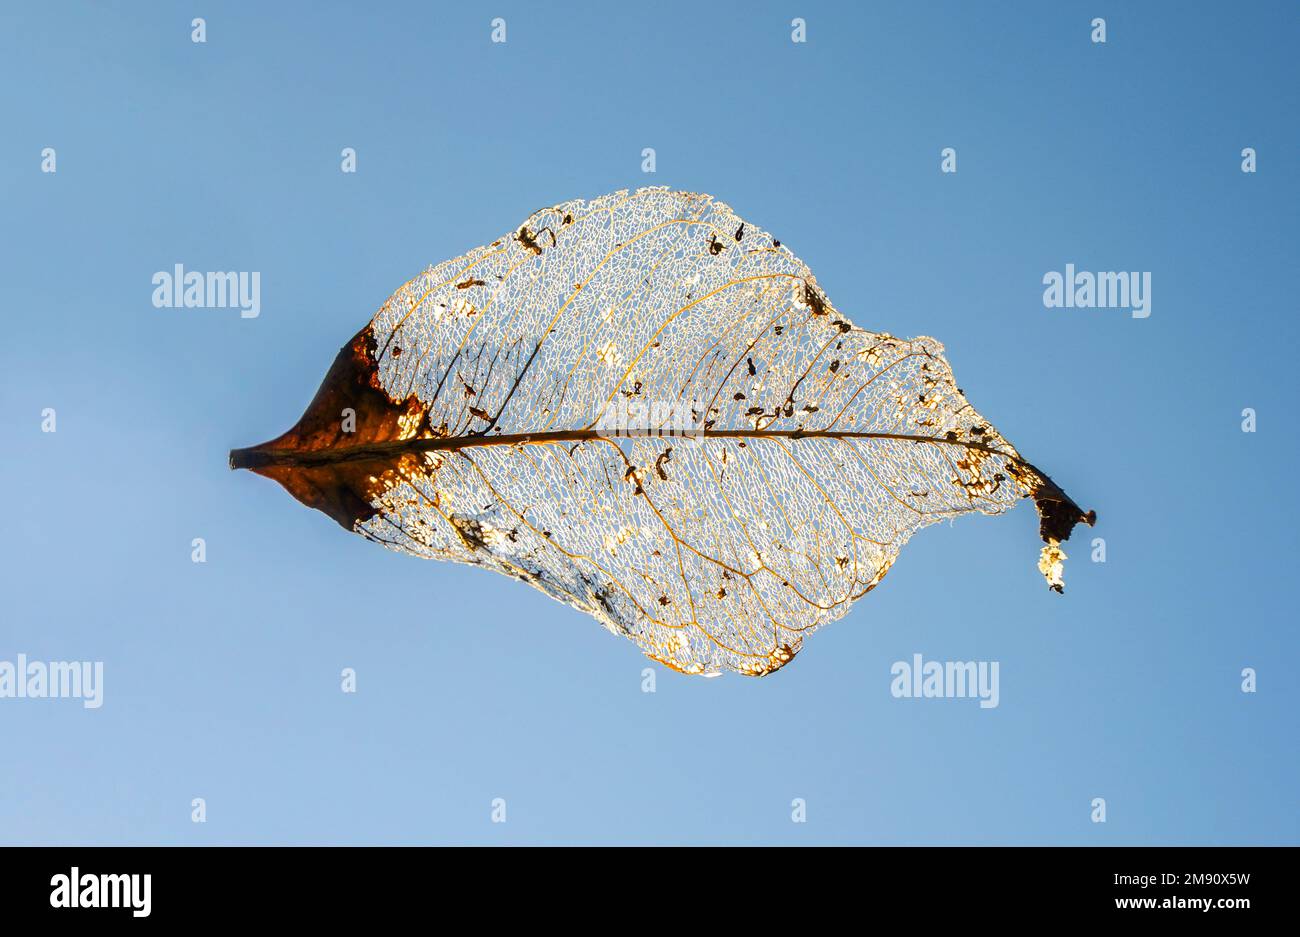 Dead decomposed leaf, rotten leaf floating in air with blue sky behind. Stock Photo